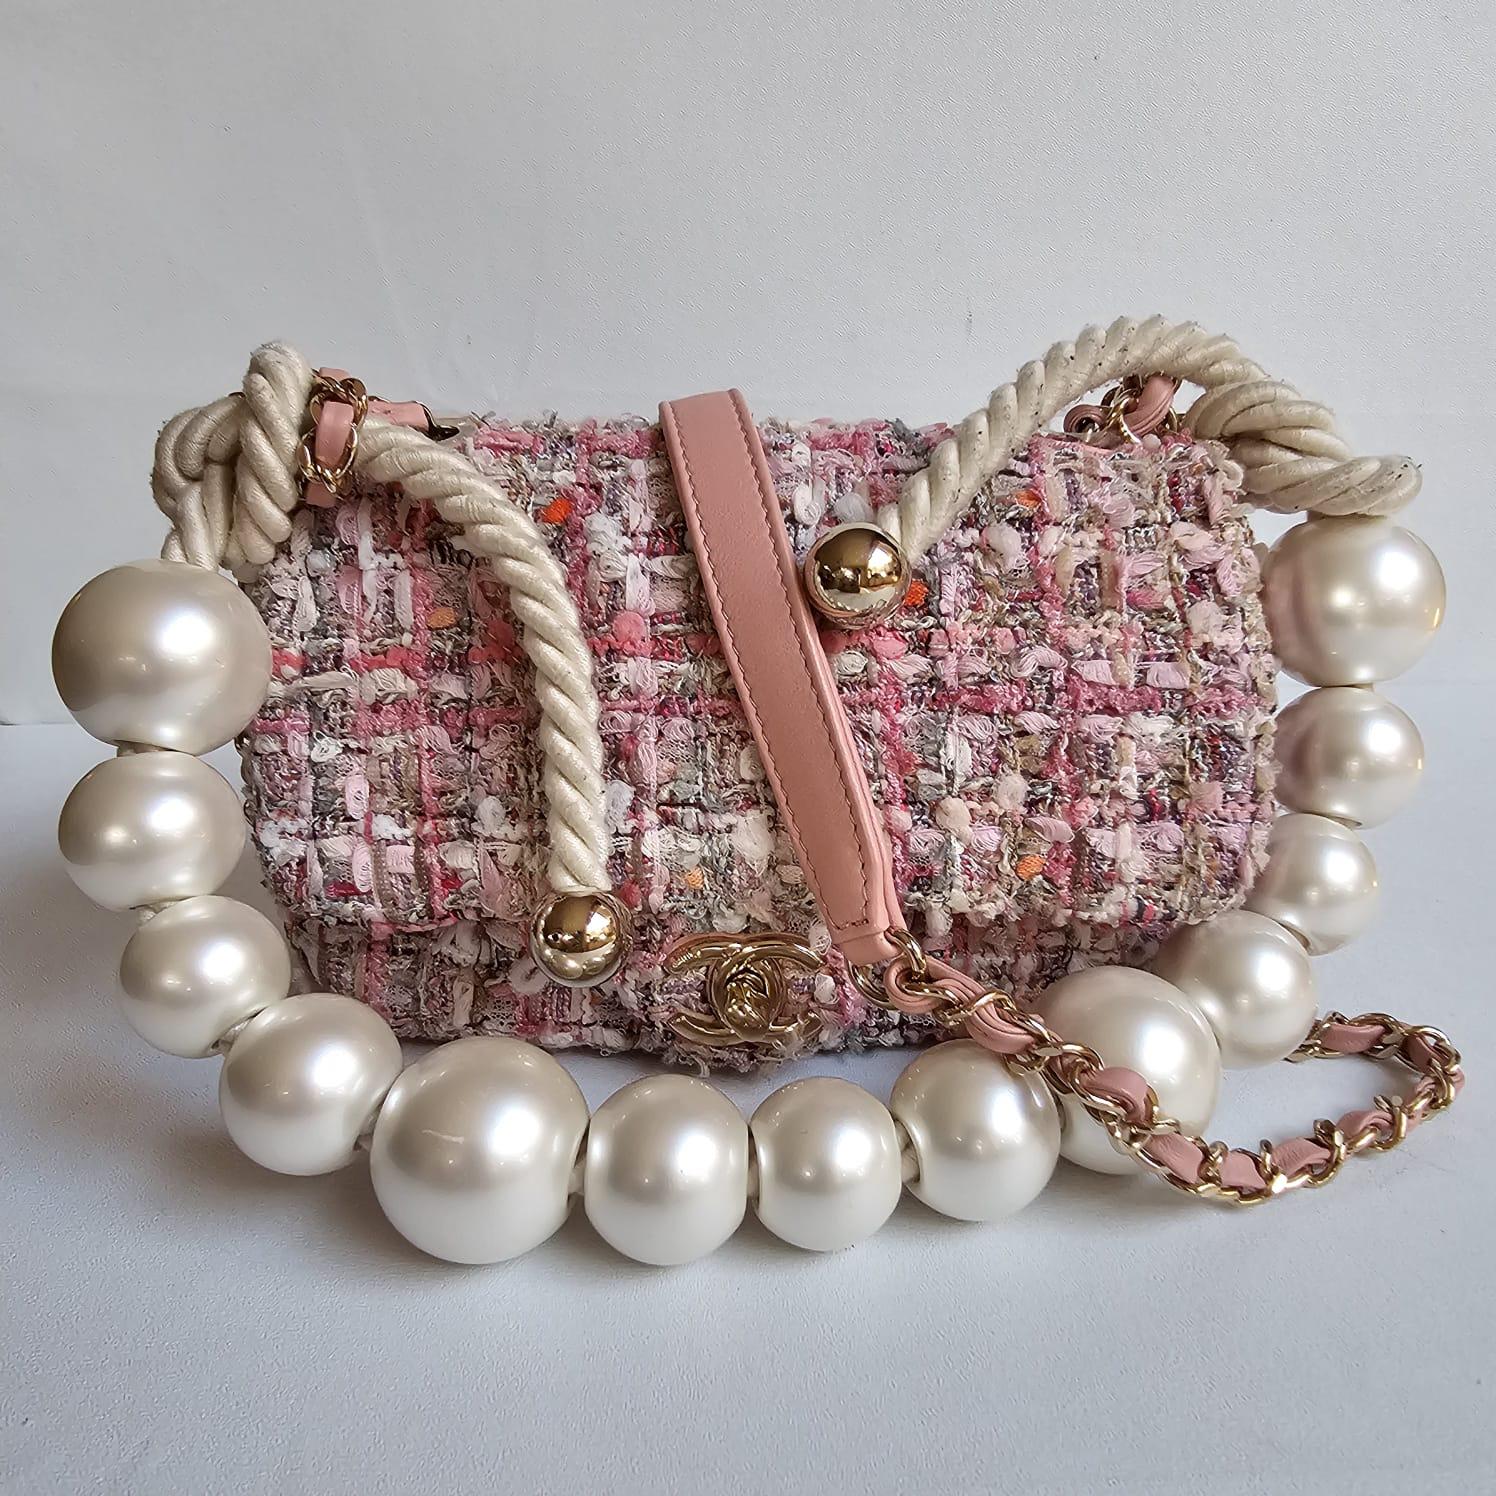 Rare by the sea in mini pink tweed. Beautiful collector bag. Classic mini flap with chunky pearl handles. Slight worn tweed, but other than that still in good condition. Item is missing its card, but clear holo and holo checker. Comes with dust bag.